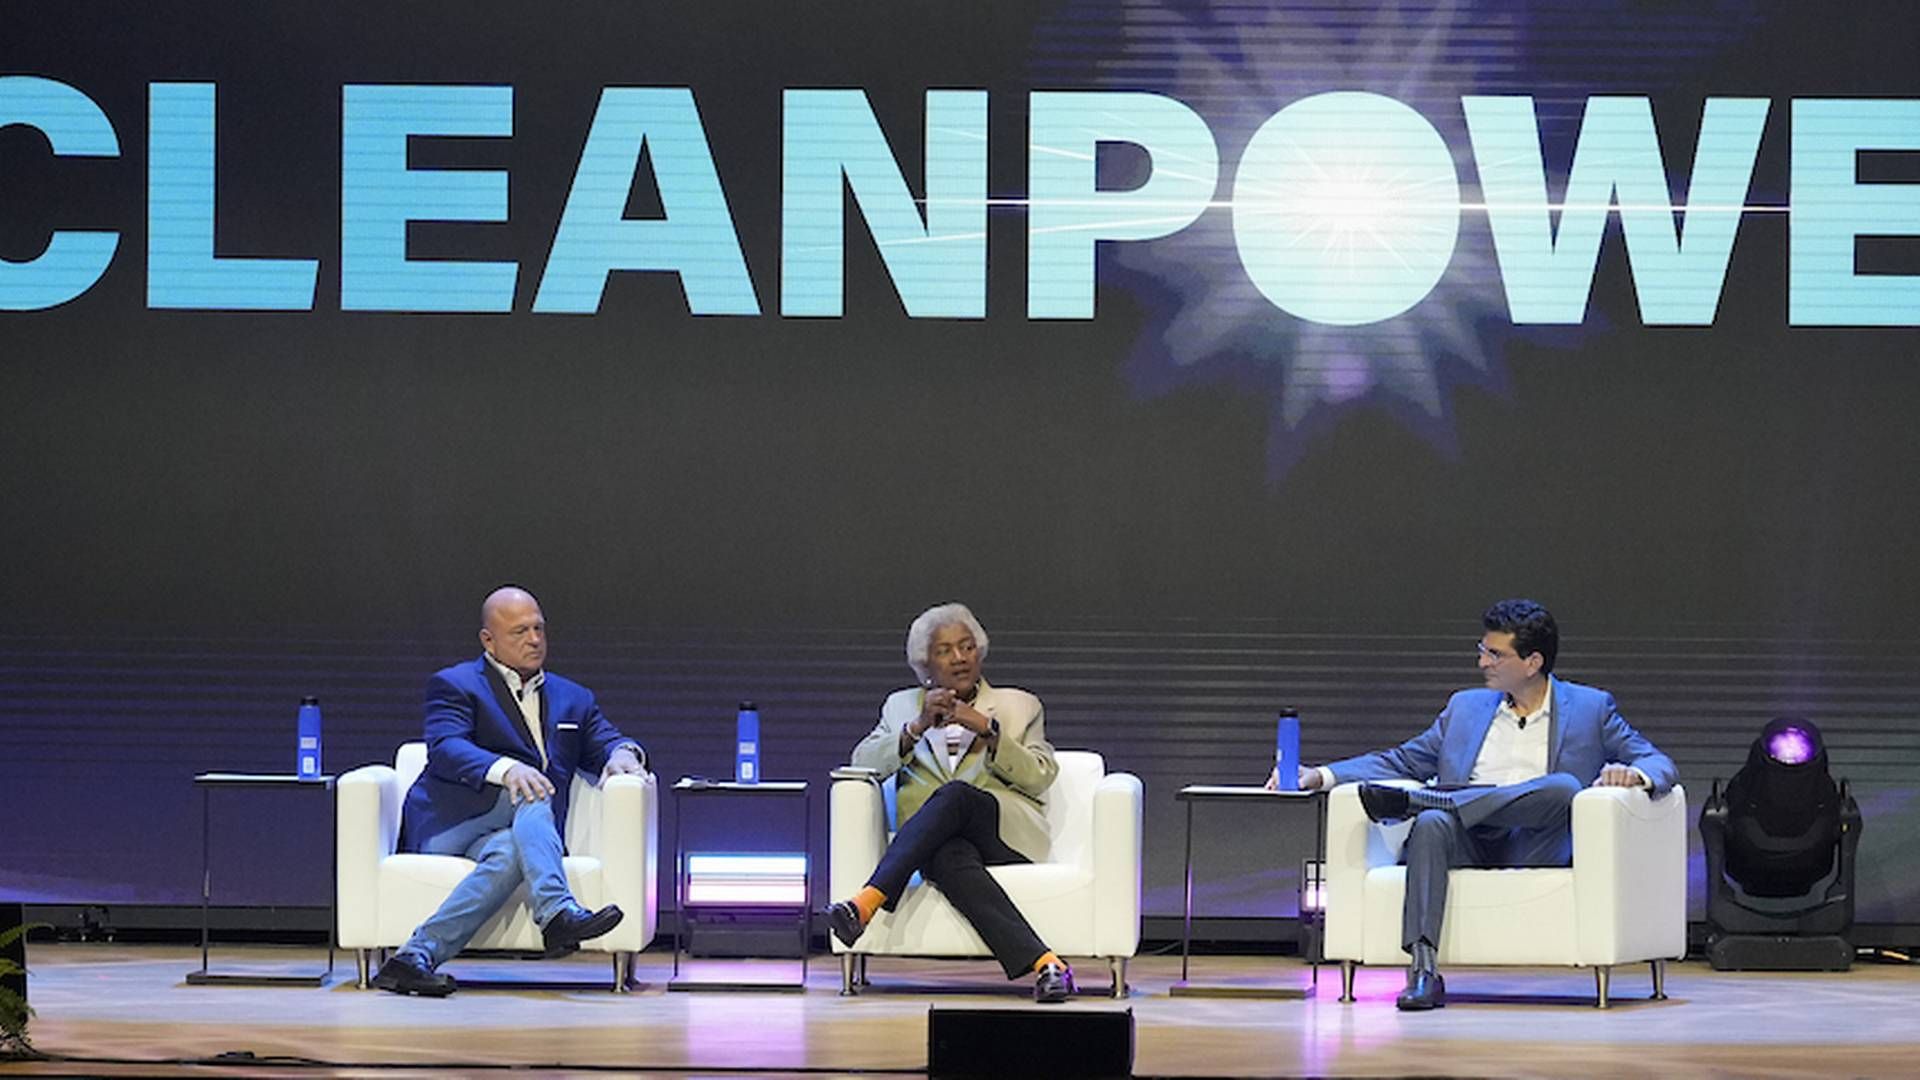 The opening debate at the Cleanpower 2024 conference, featuring former DNC chair Donna Brazile and former Trump advisor David Urban. | Photo: American Clean Power